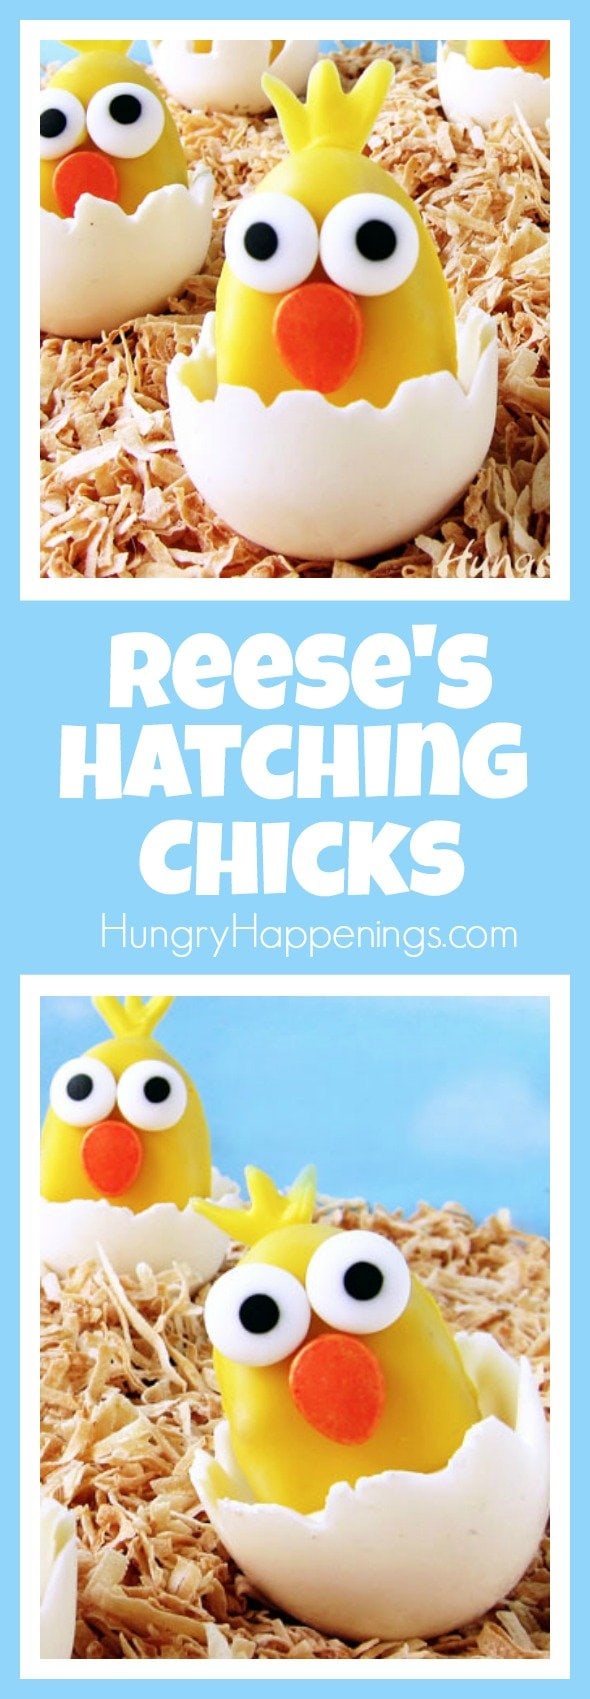 These darling Reese's Hatching Chicks will bring smiles to everyone who see's them. Made from Yellow Reese's Peanut Butter Cup Eggs, these Easter treats could not be any cuter. 